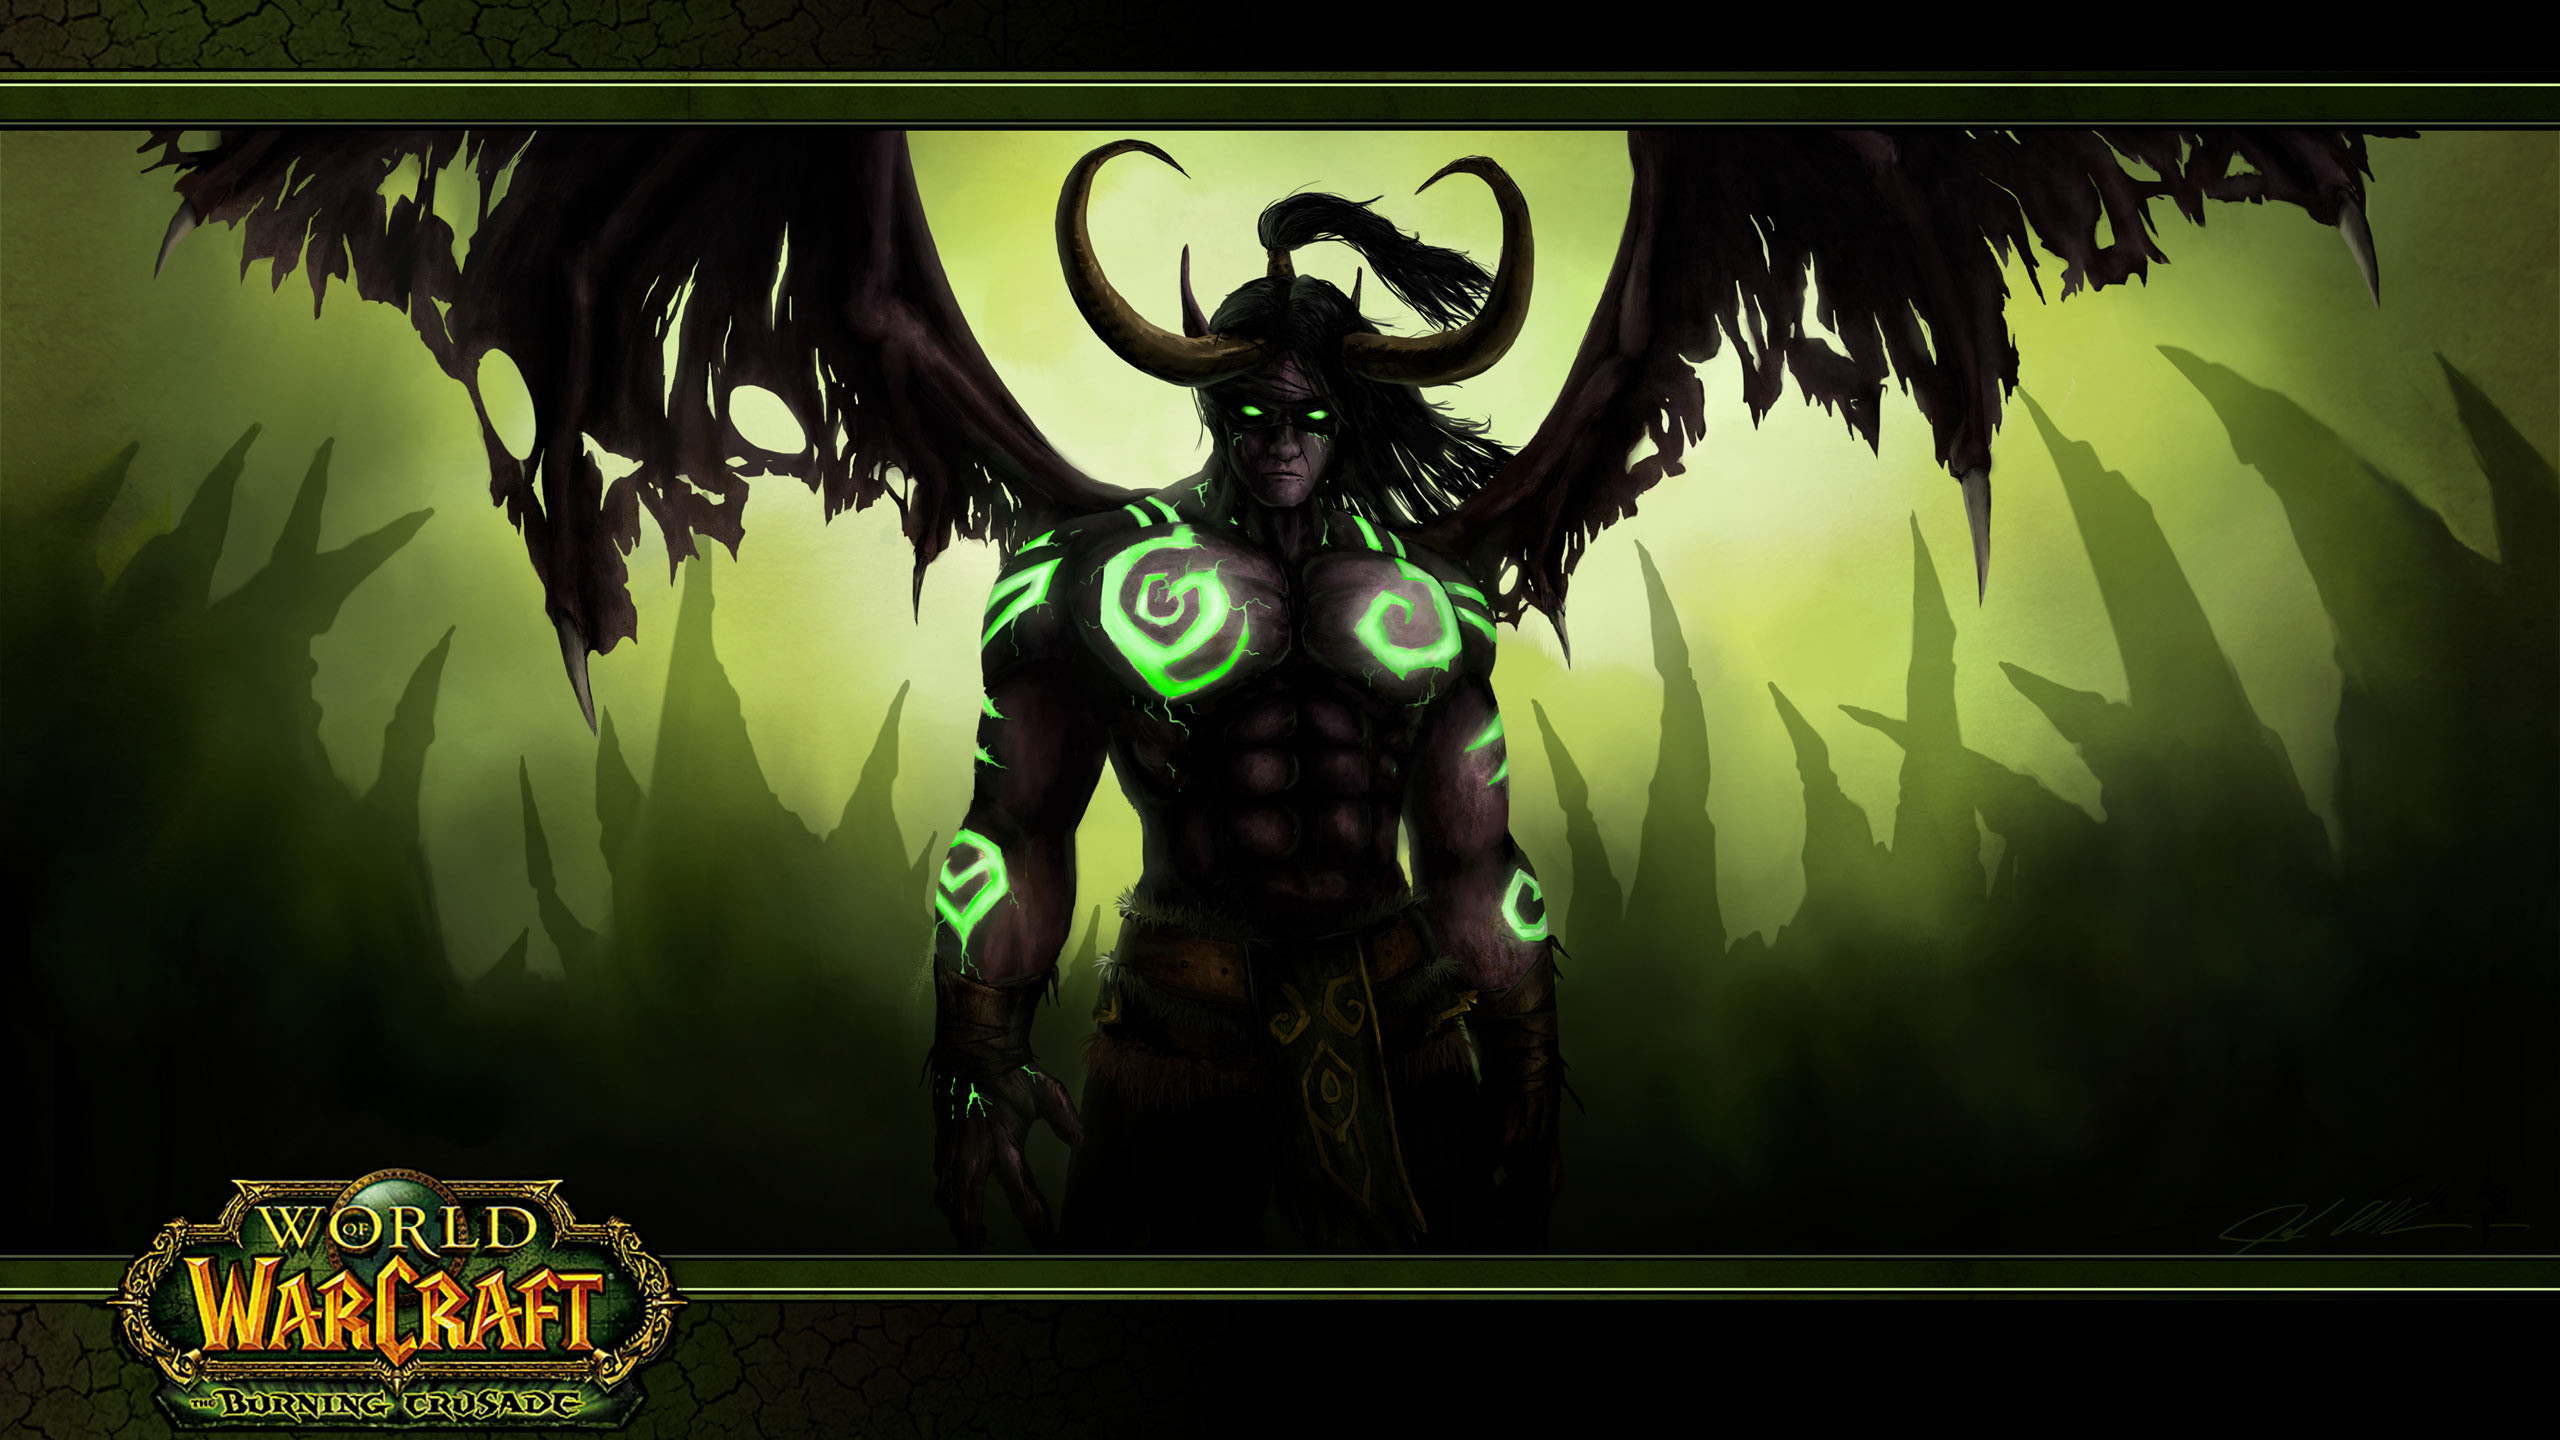 2560x1440  23 World Of Warcraft: The Burning Crusade HD Wallpapers |  Backgrounds - Wallpaper Abyss